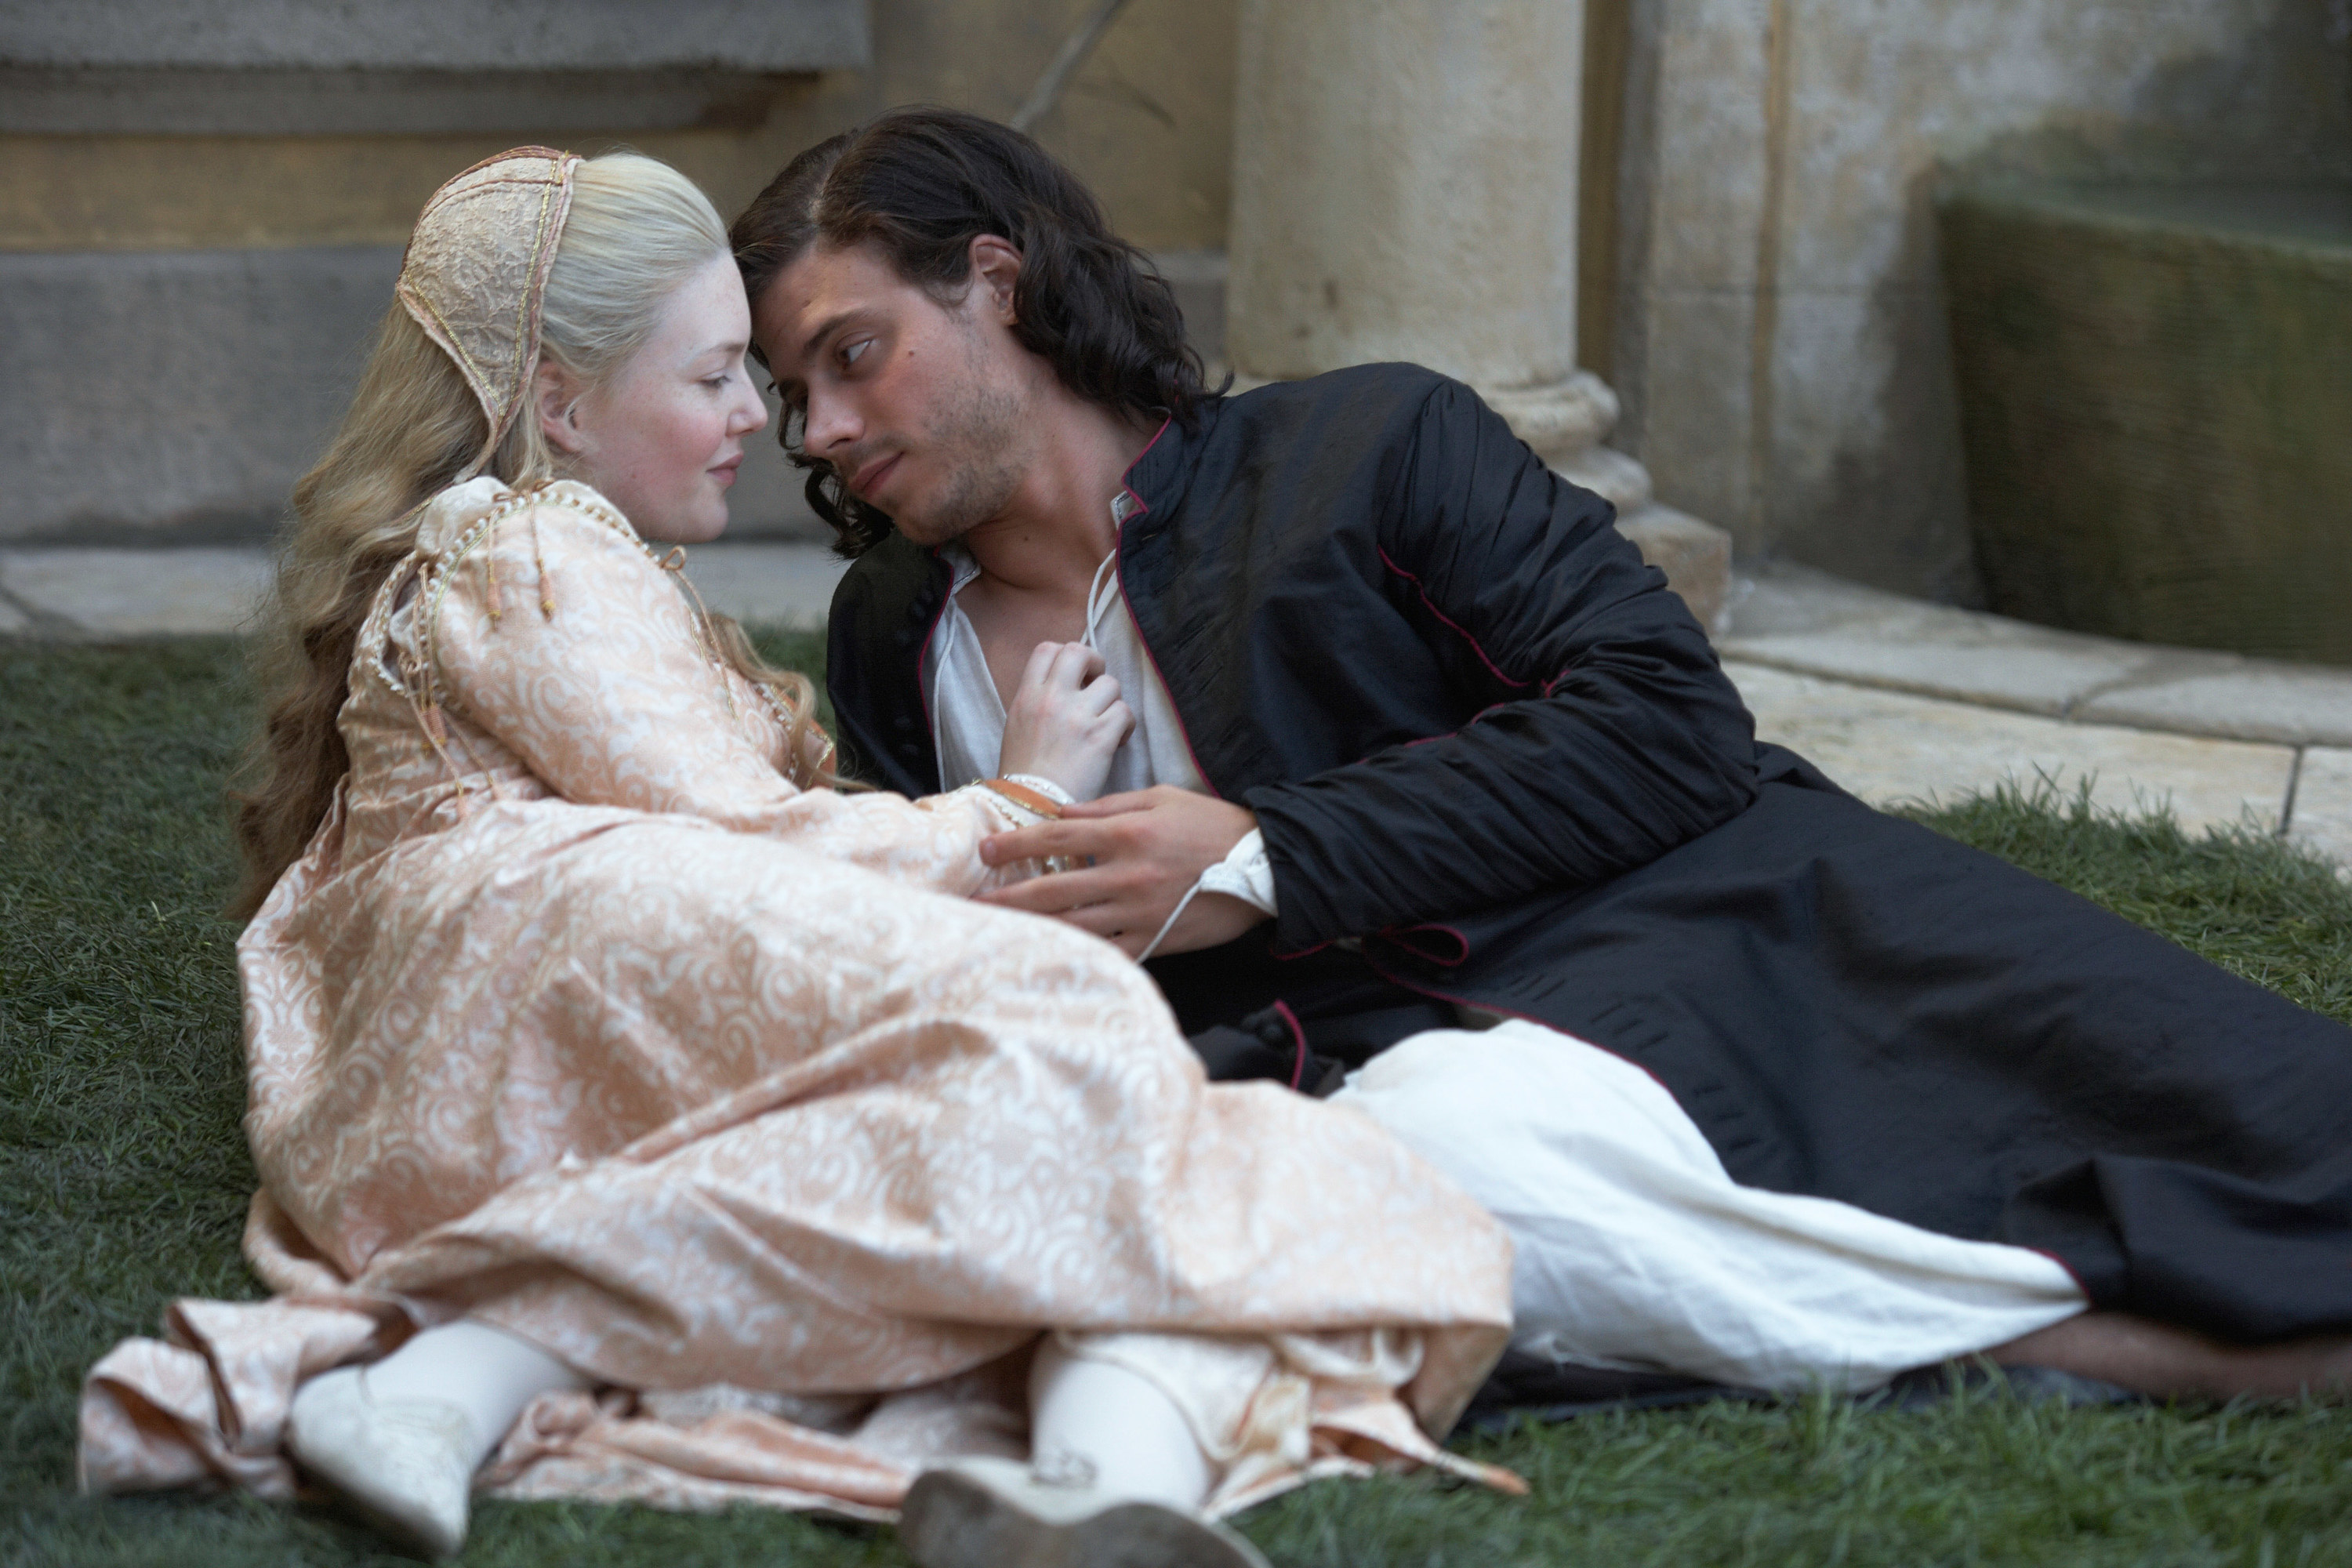 Lucrezia and Cesare getting physical on the grass